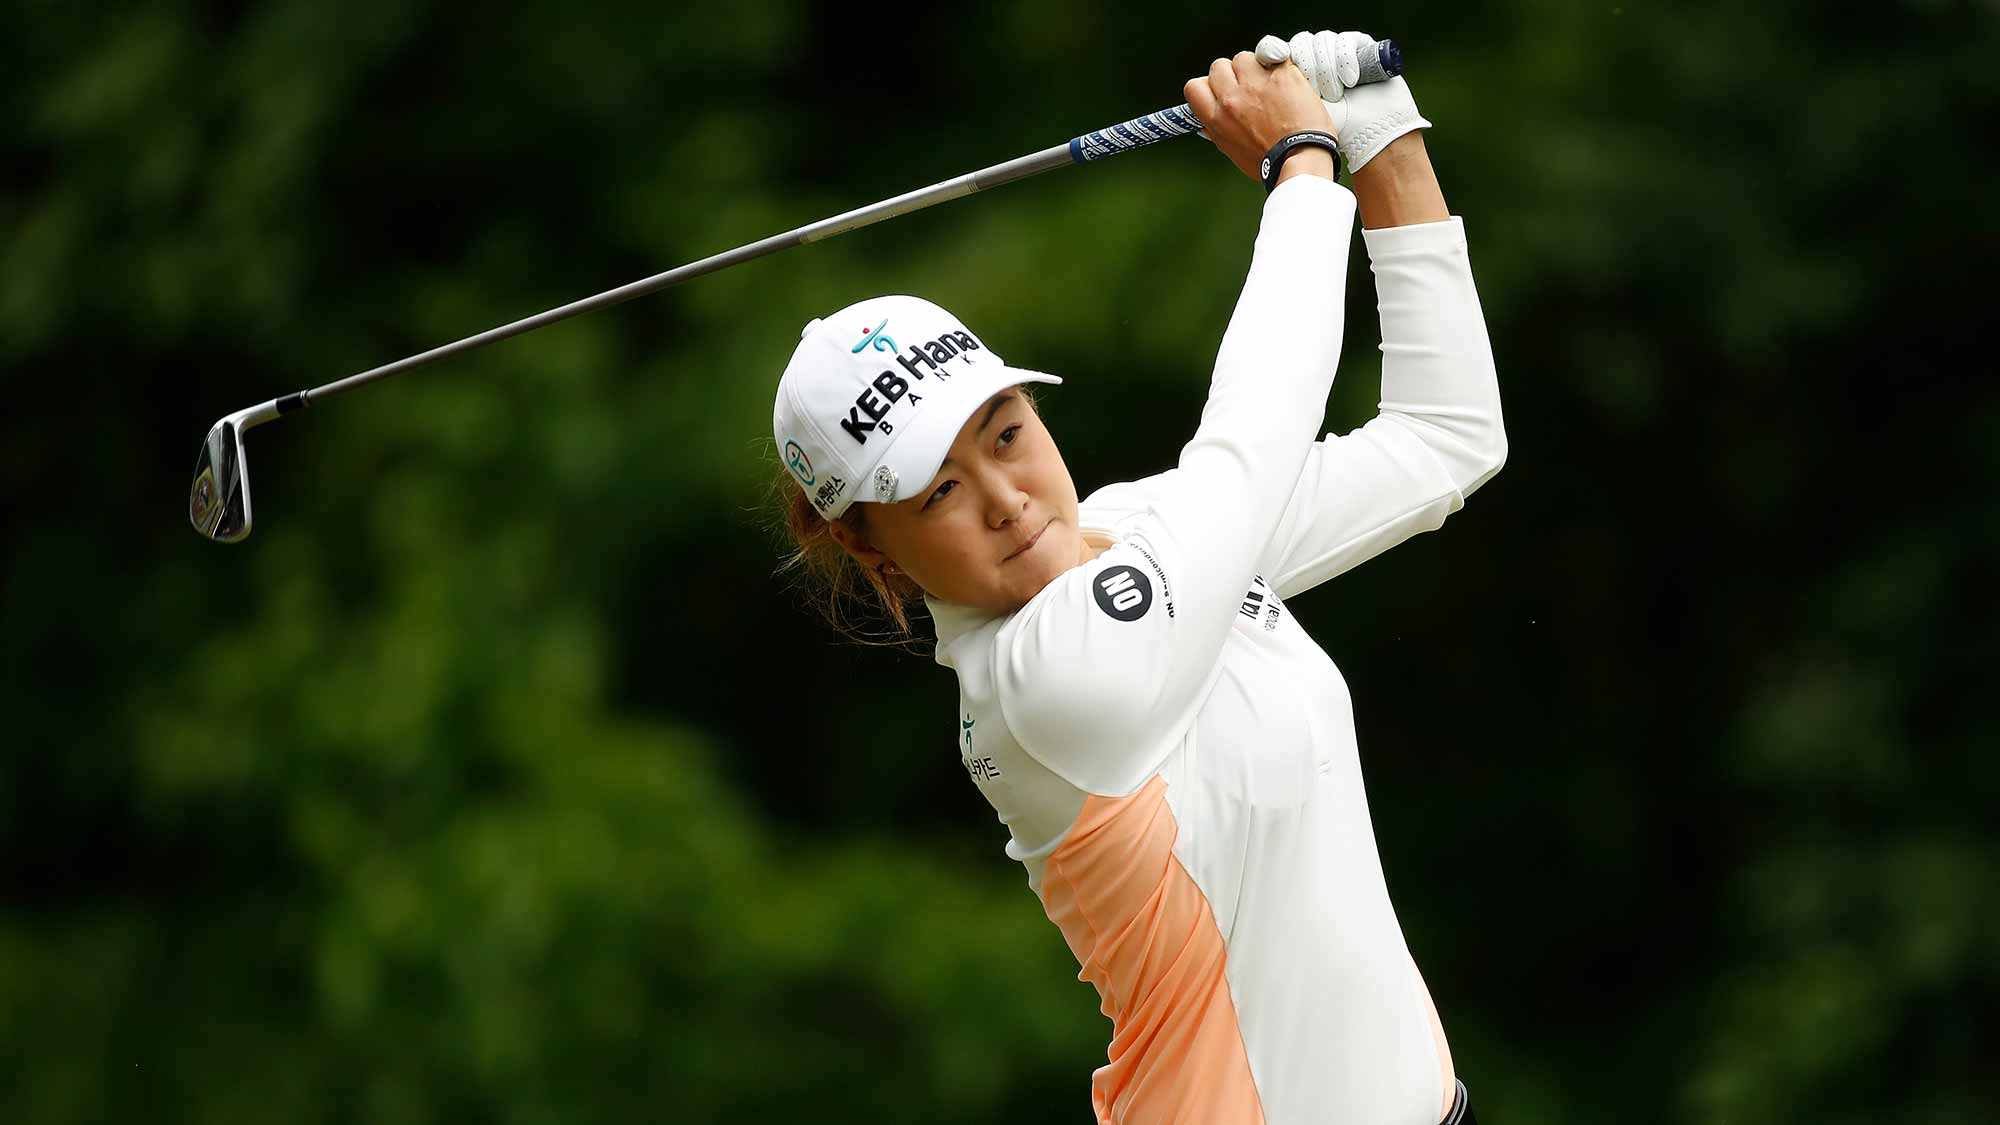 Minjee Lee of Australia watches her tee shot on the seventh hole during the second round of the LPGA Volvik Championship on May 26, 2017 at Travis Pointe Country Club Ann Arbor, Michigan